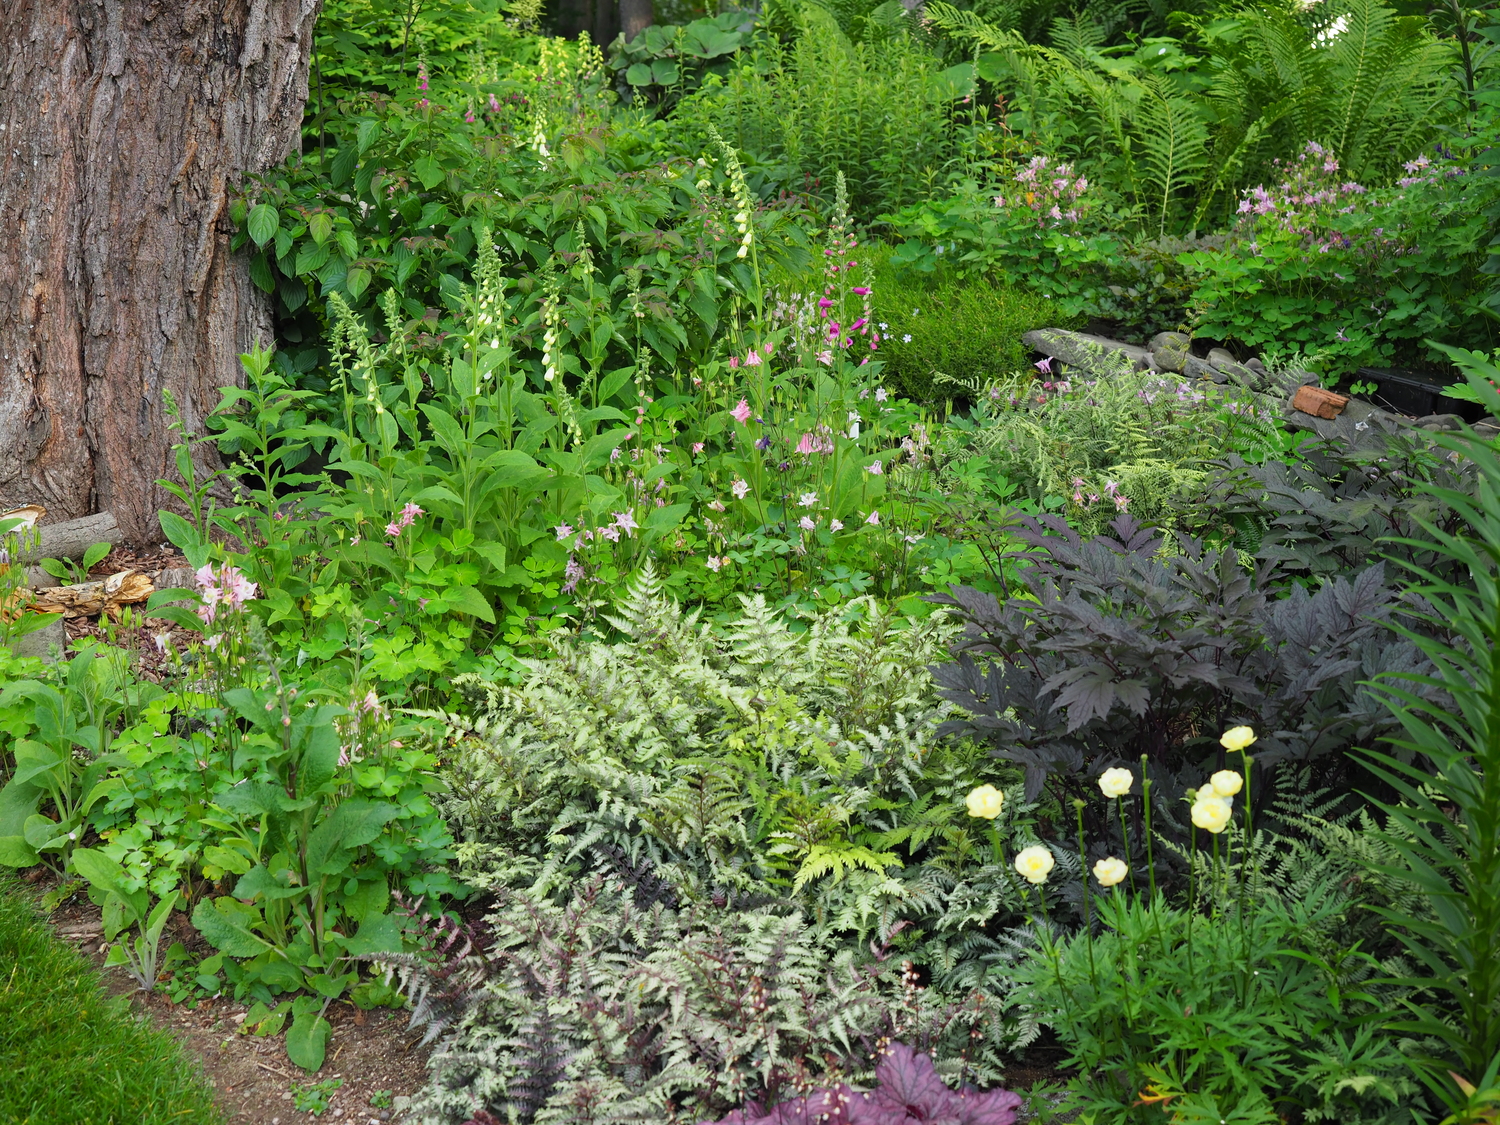 This is an area that was once totally shaded but as the maple above ages and pieces need to be removed there’s more light. Early in the season there are only columbines but as they fade the self-seeding Digitalis fill in. The Japanese painted ferns add color and interest, covering the ground, and Actaea 